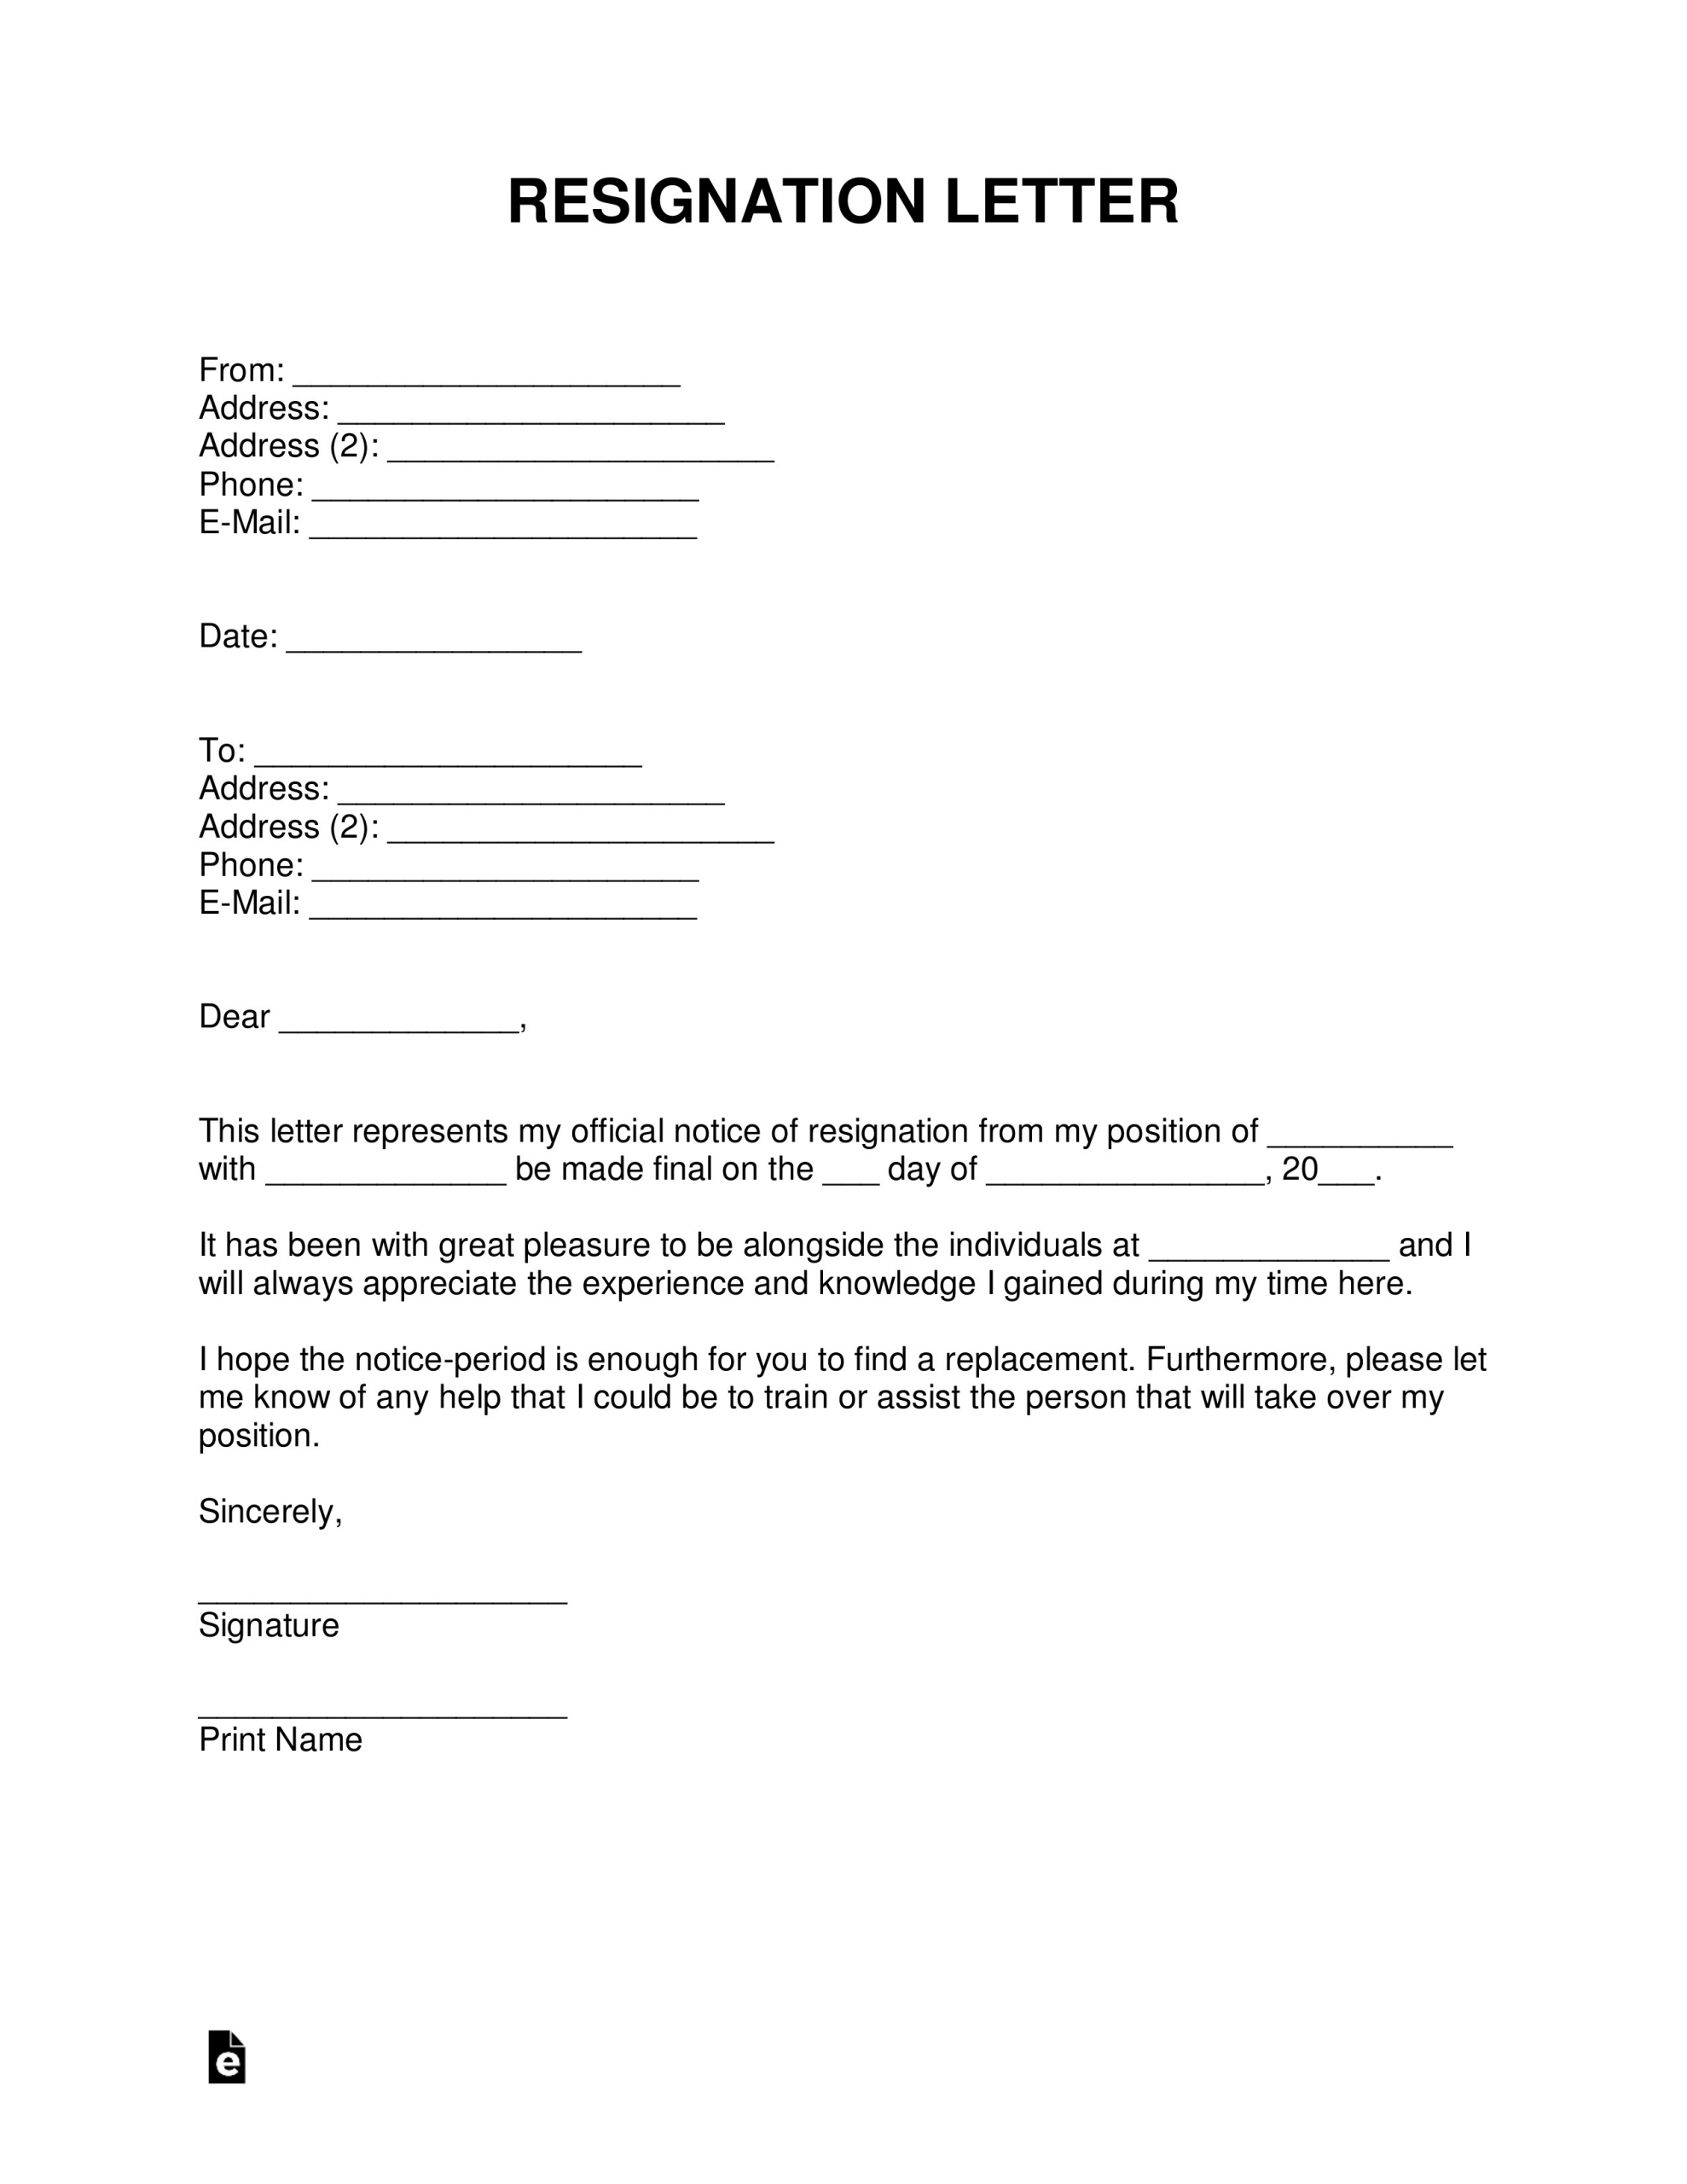 Resignation Letter Template Free Free Resignation Letters